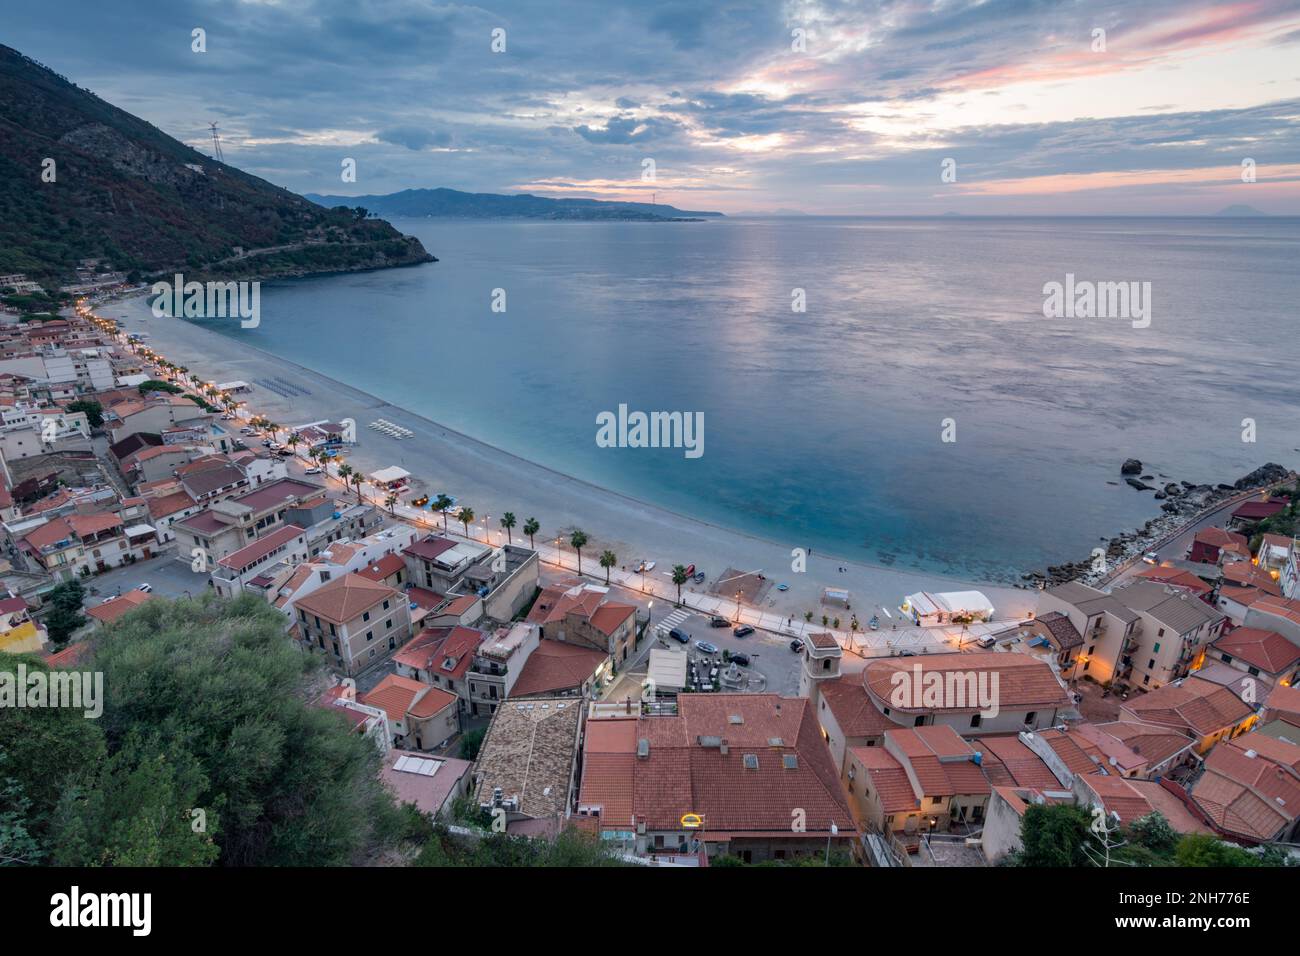 Panoramic view of Scilla beach at dusk, Calabria Stock Photo